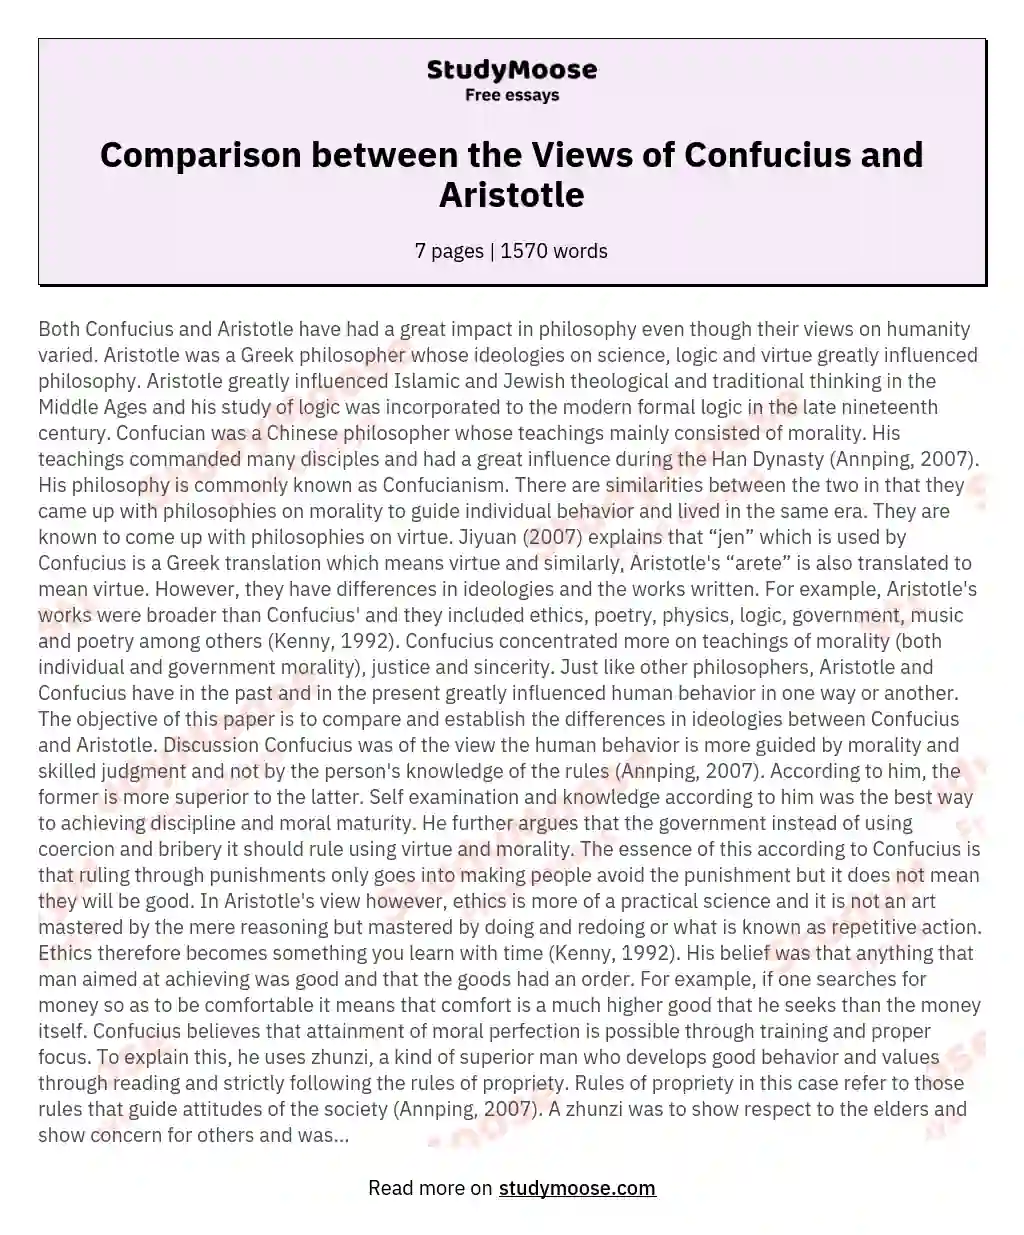 Comparison between the Views of Confucius and Aristotle essay